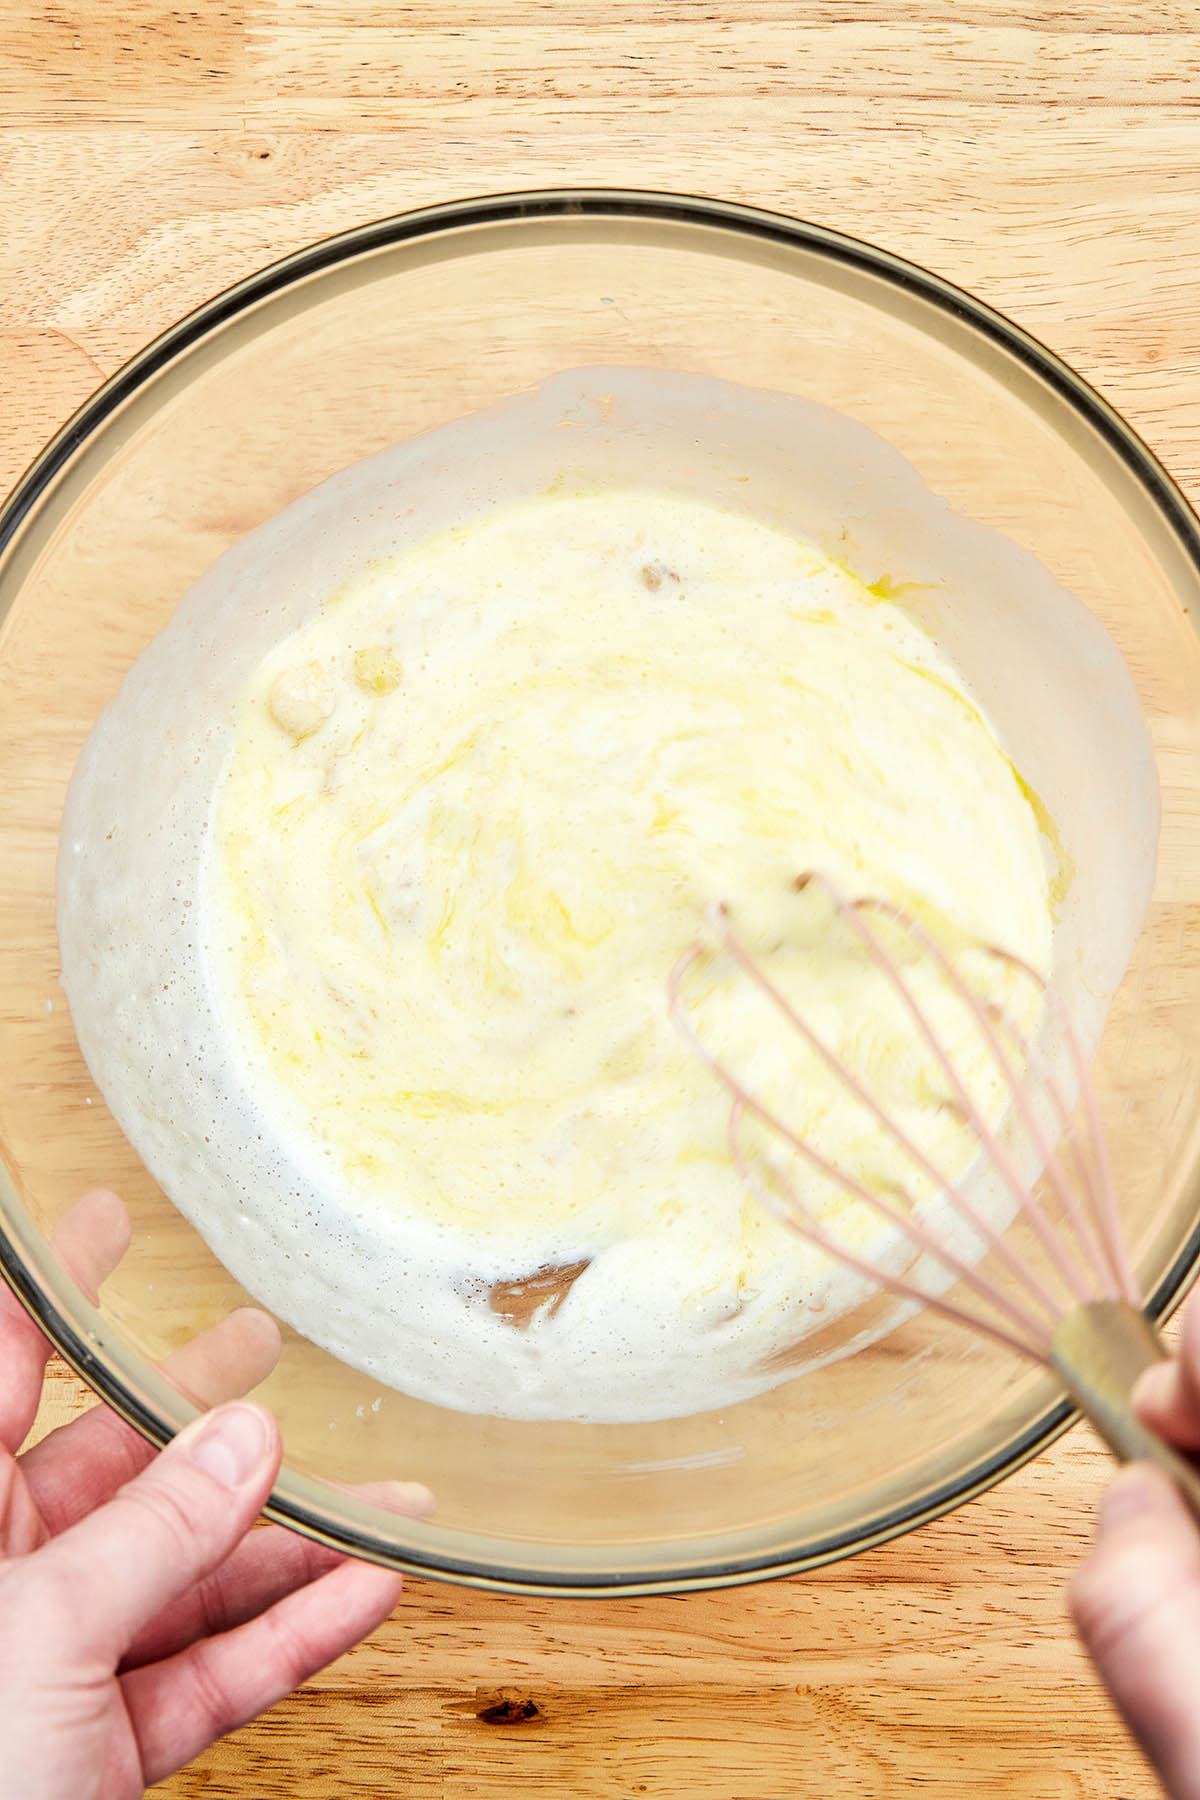 A hand using a whisk to mix wet ingredients.